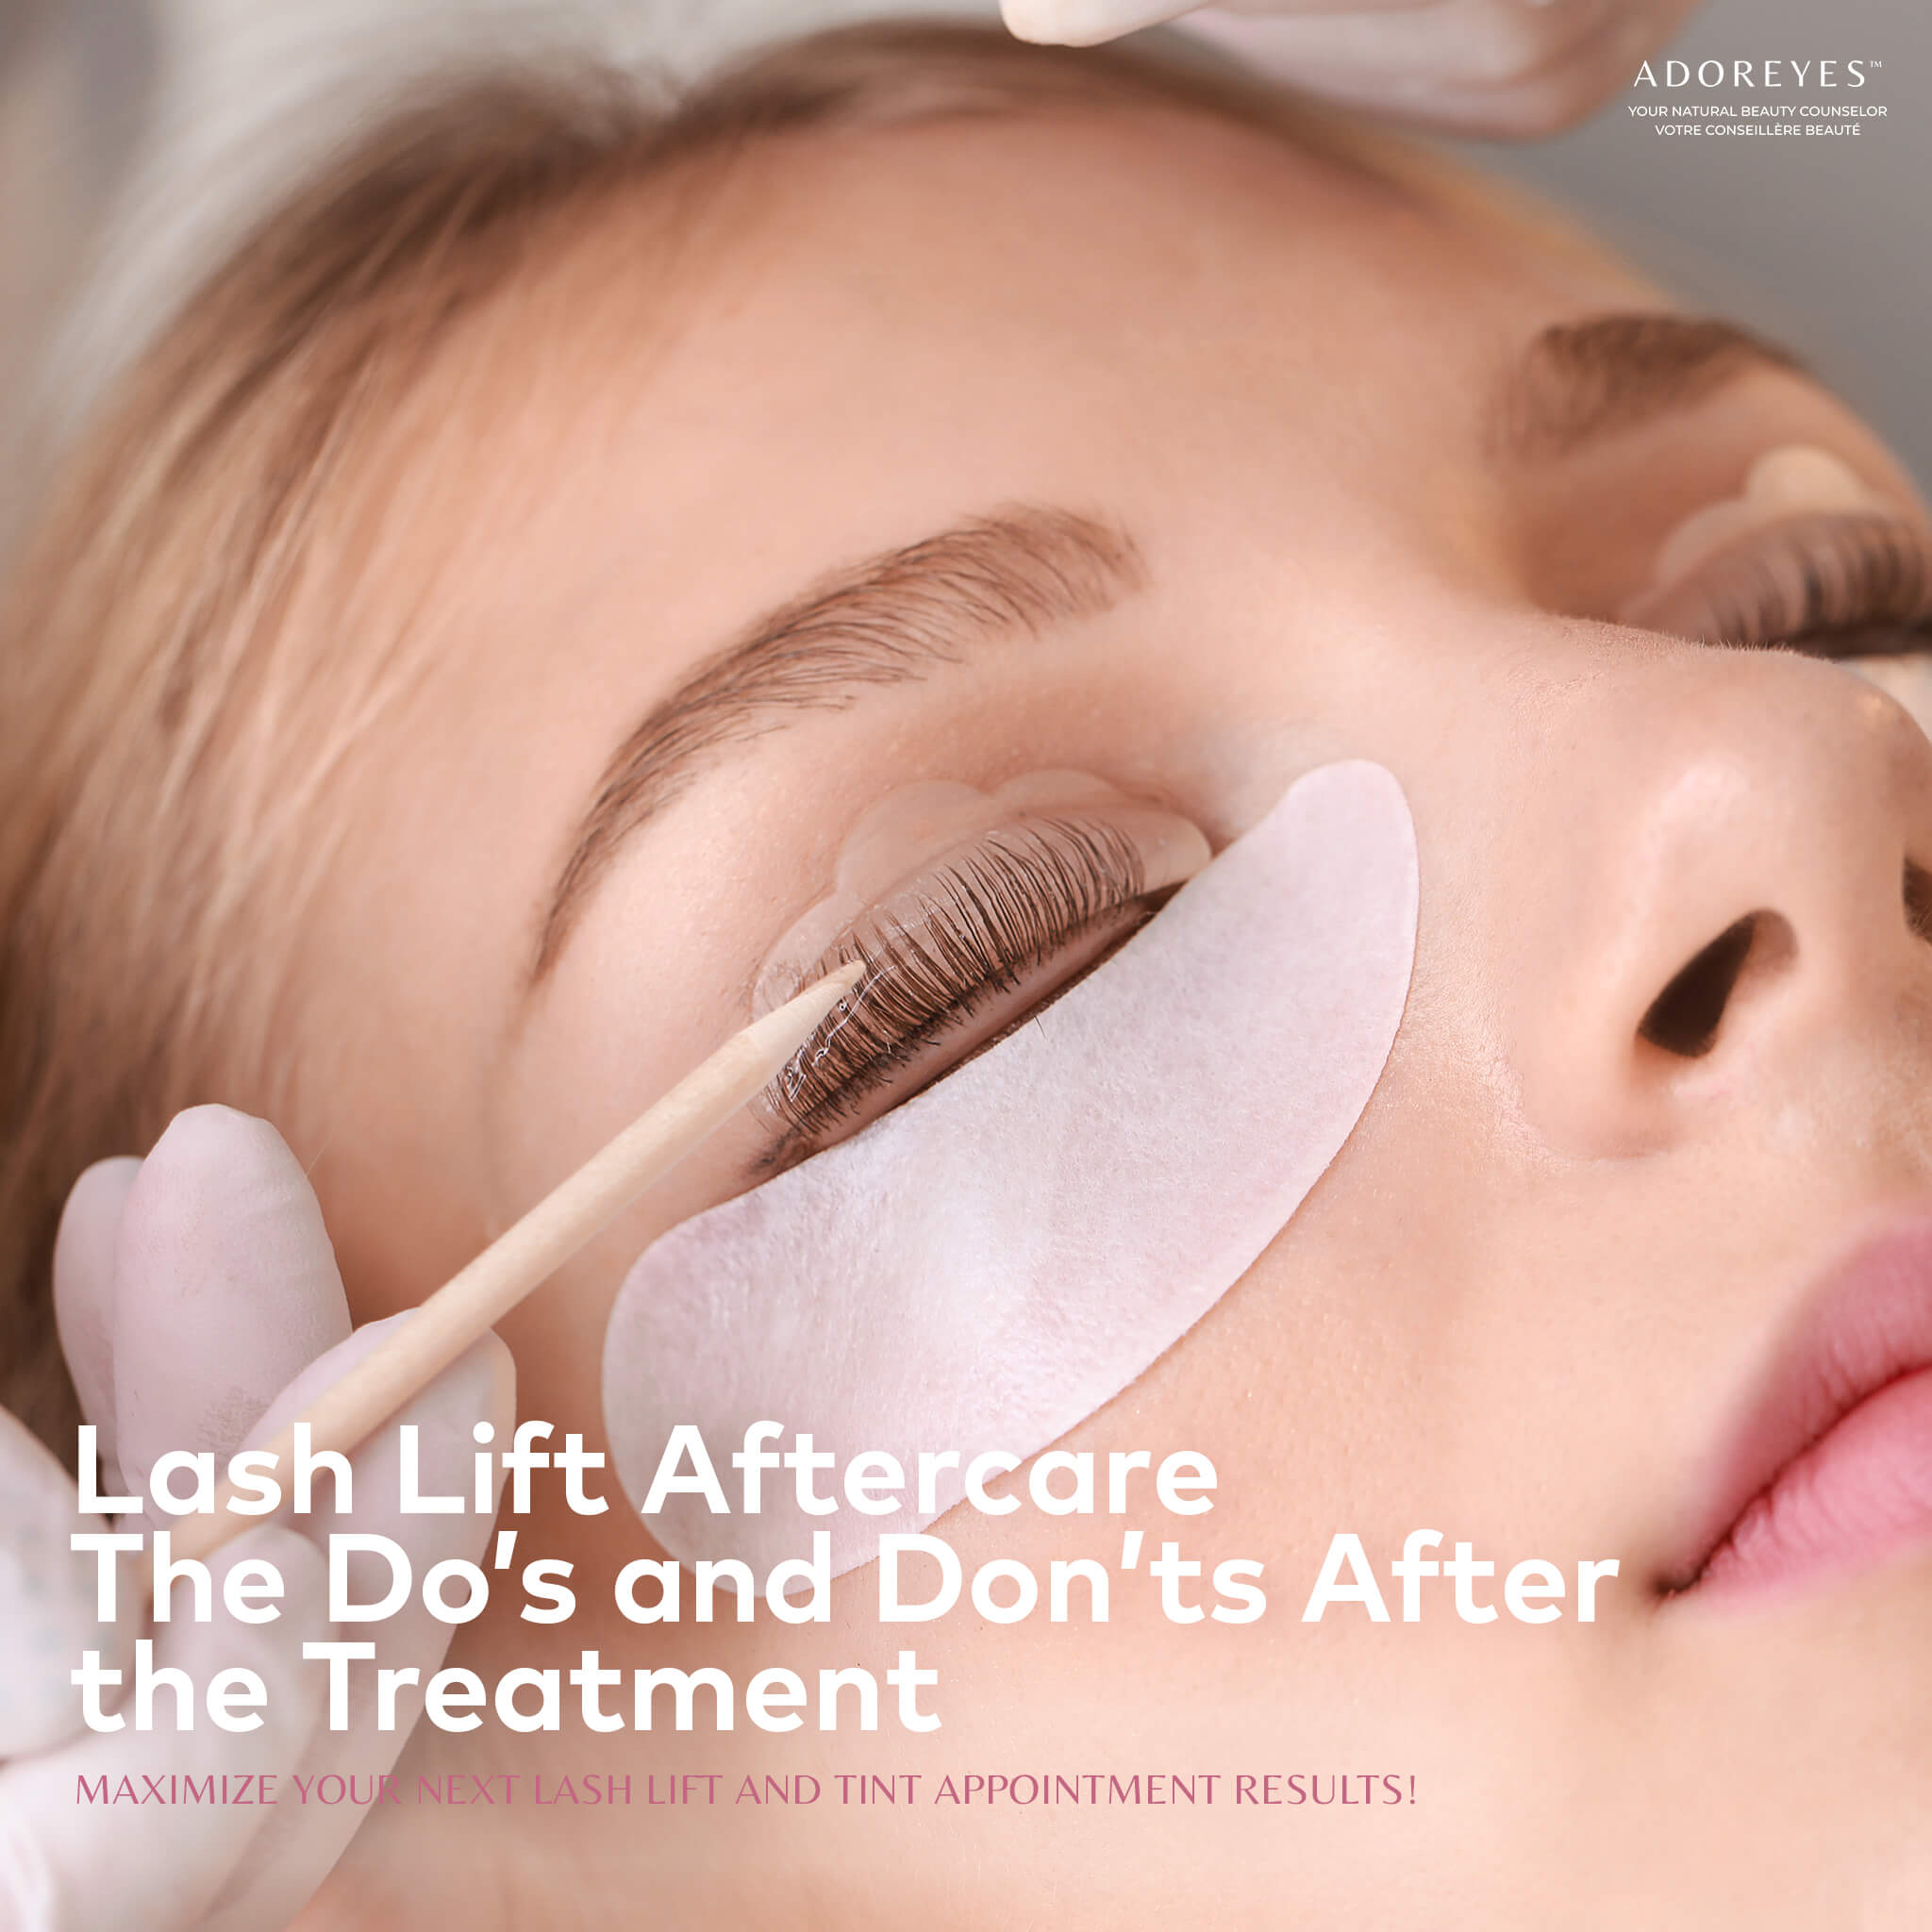 Lash Lift Aftercare - The Do's and Don'ts After the Treatment – ADOREYES